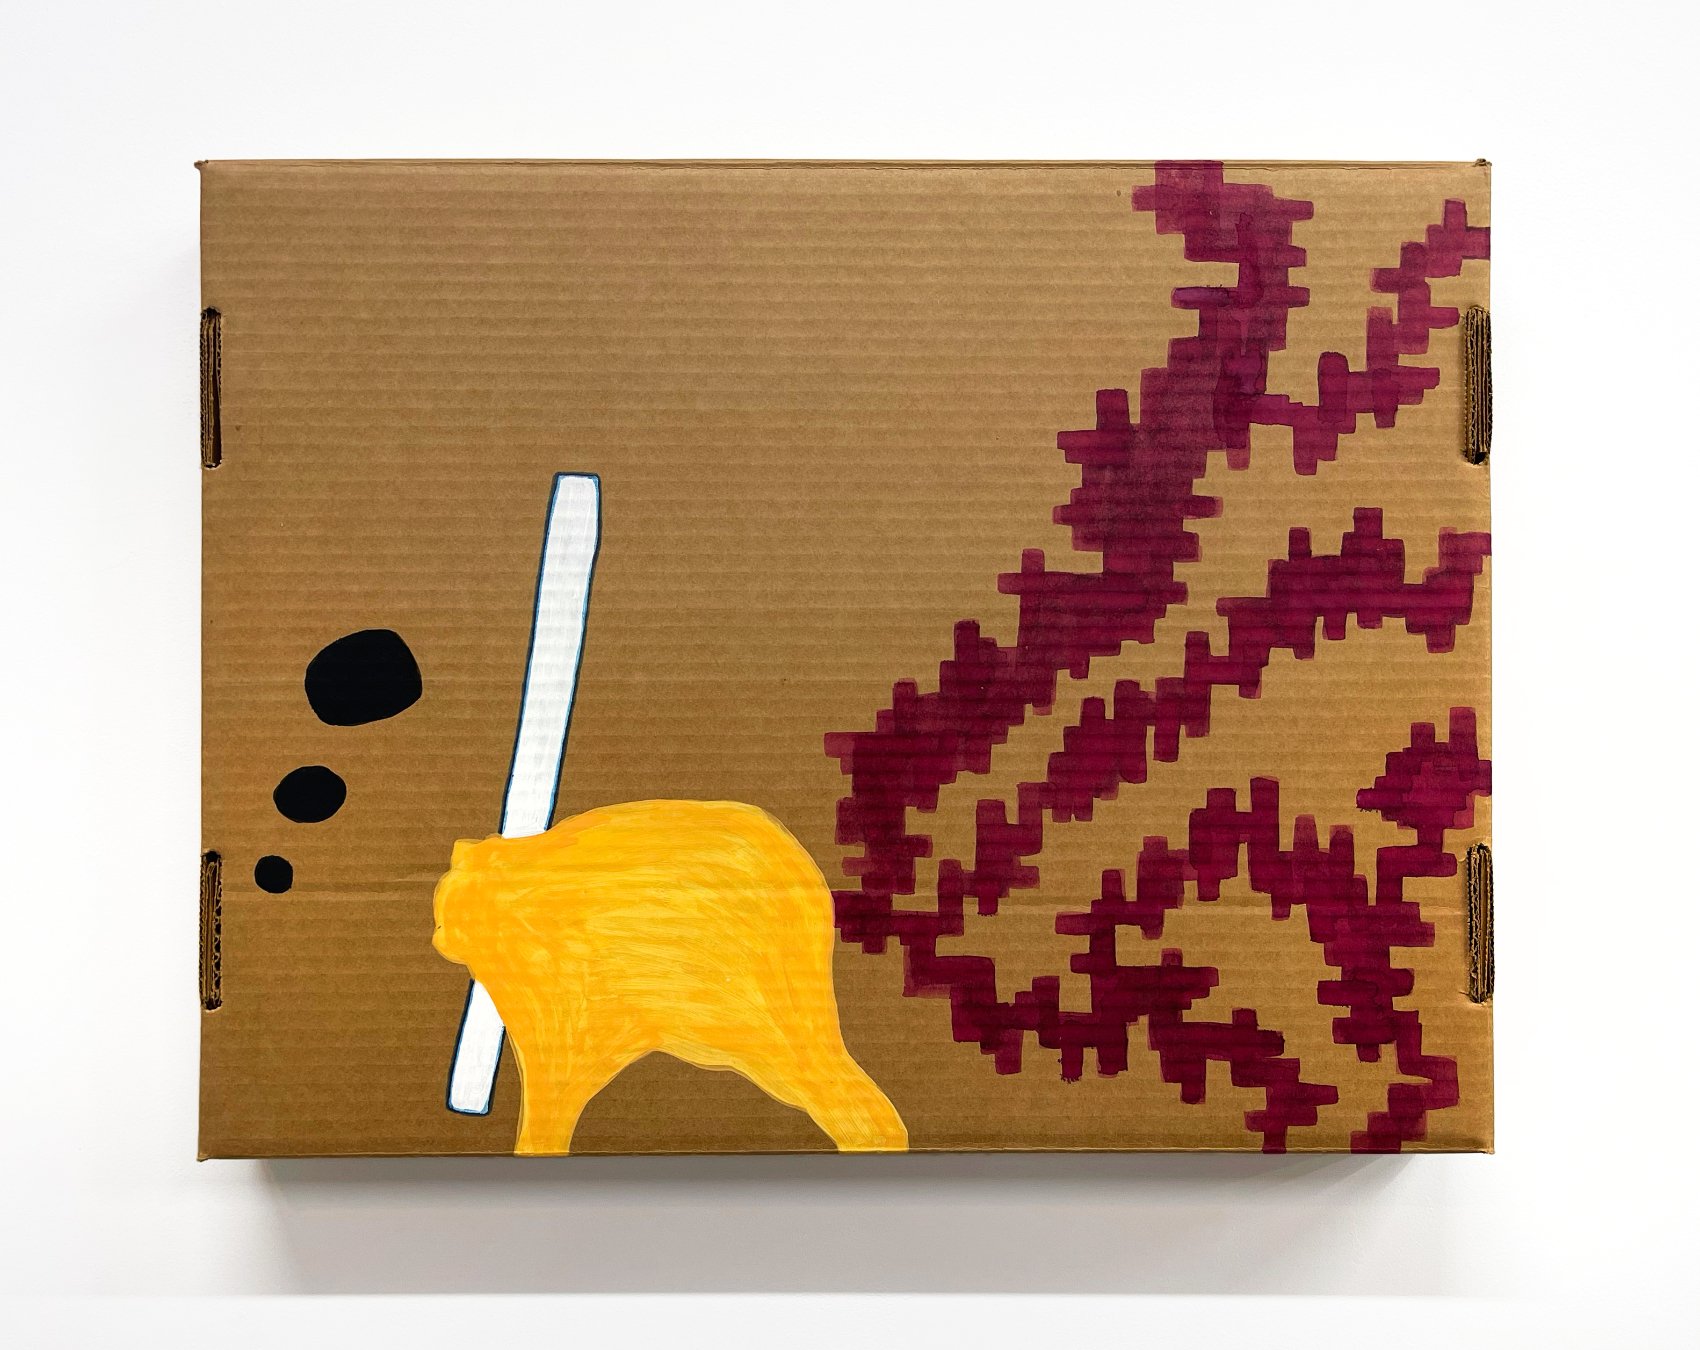  Printout (a nocturne), set 5 14 1/4 x 18 1/4 x 2 inches, Paint, ink, pen on cardboard, 2005 